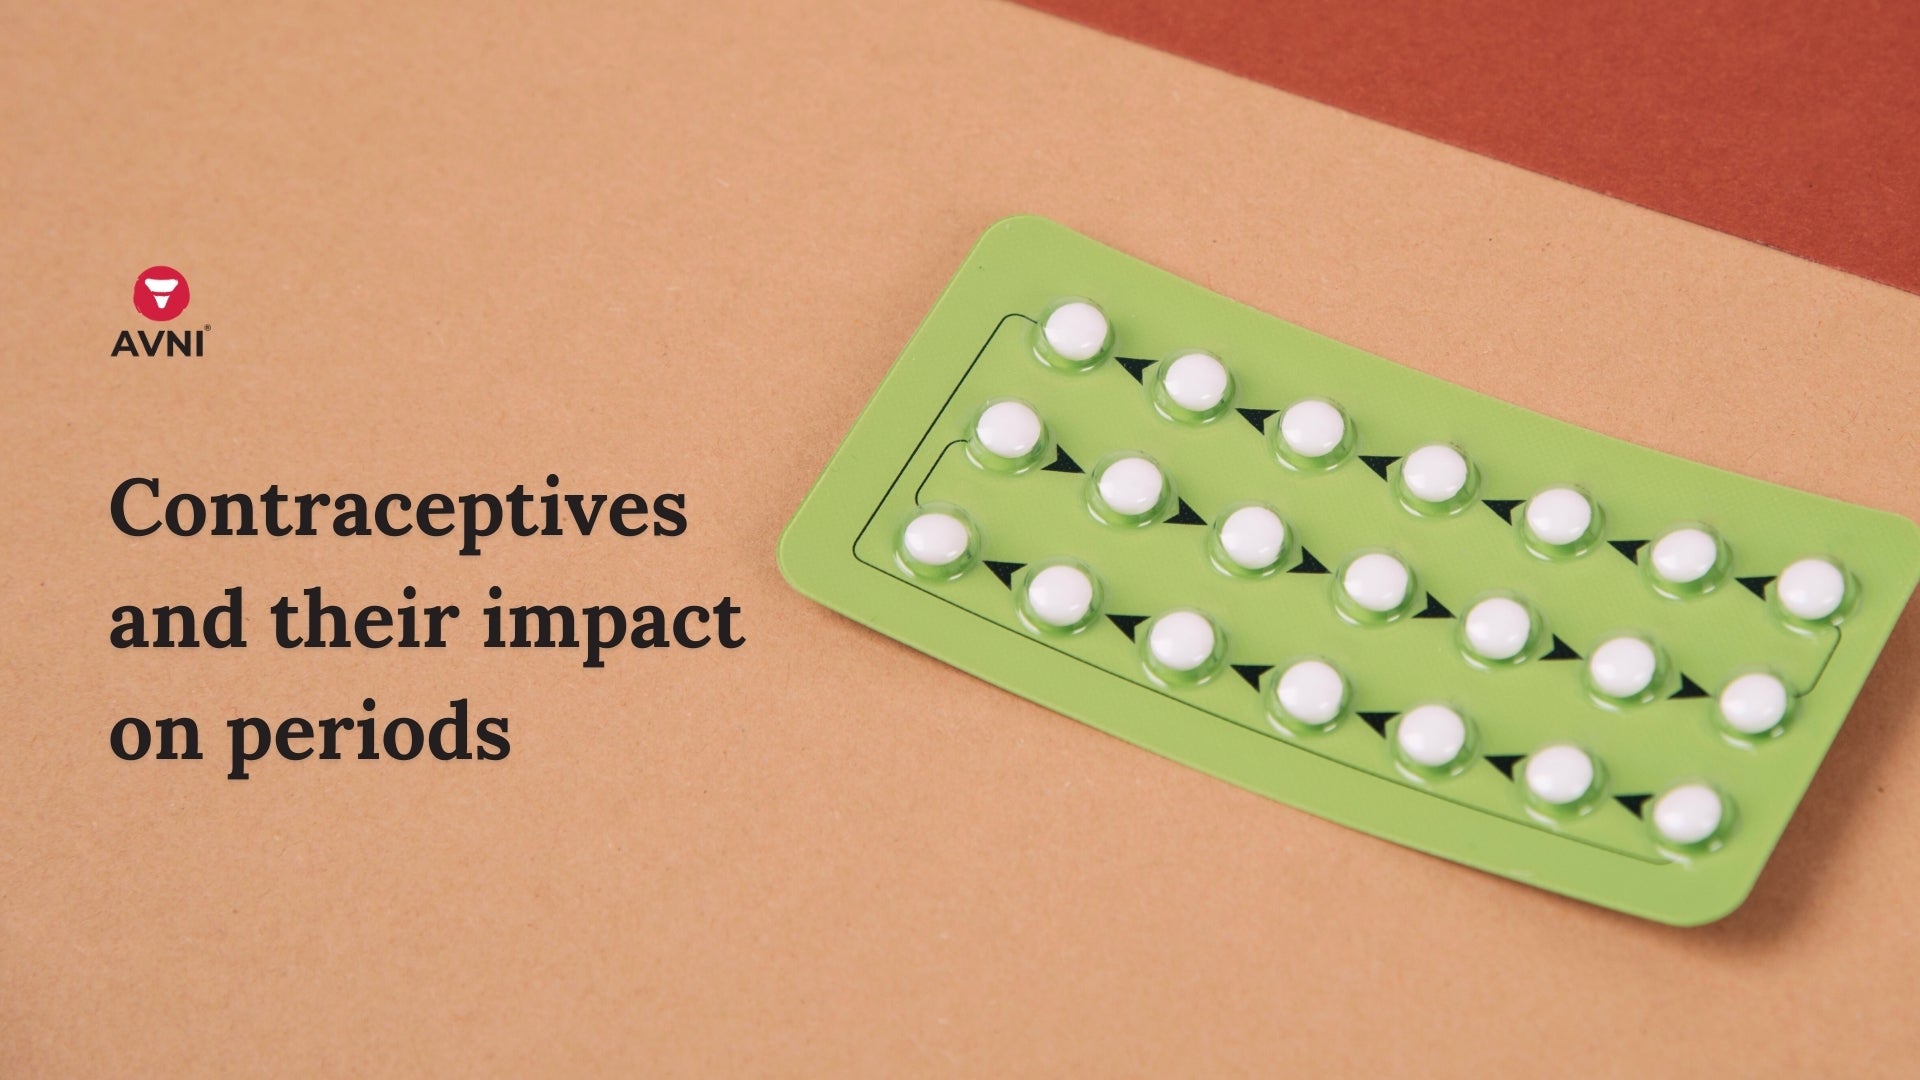 Contraceptives and their impact on periods